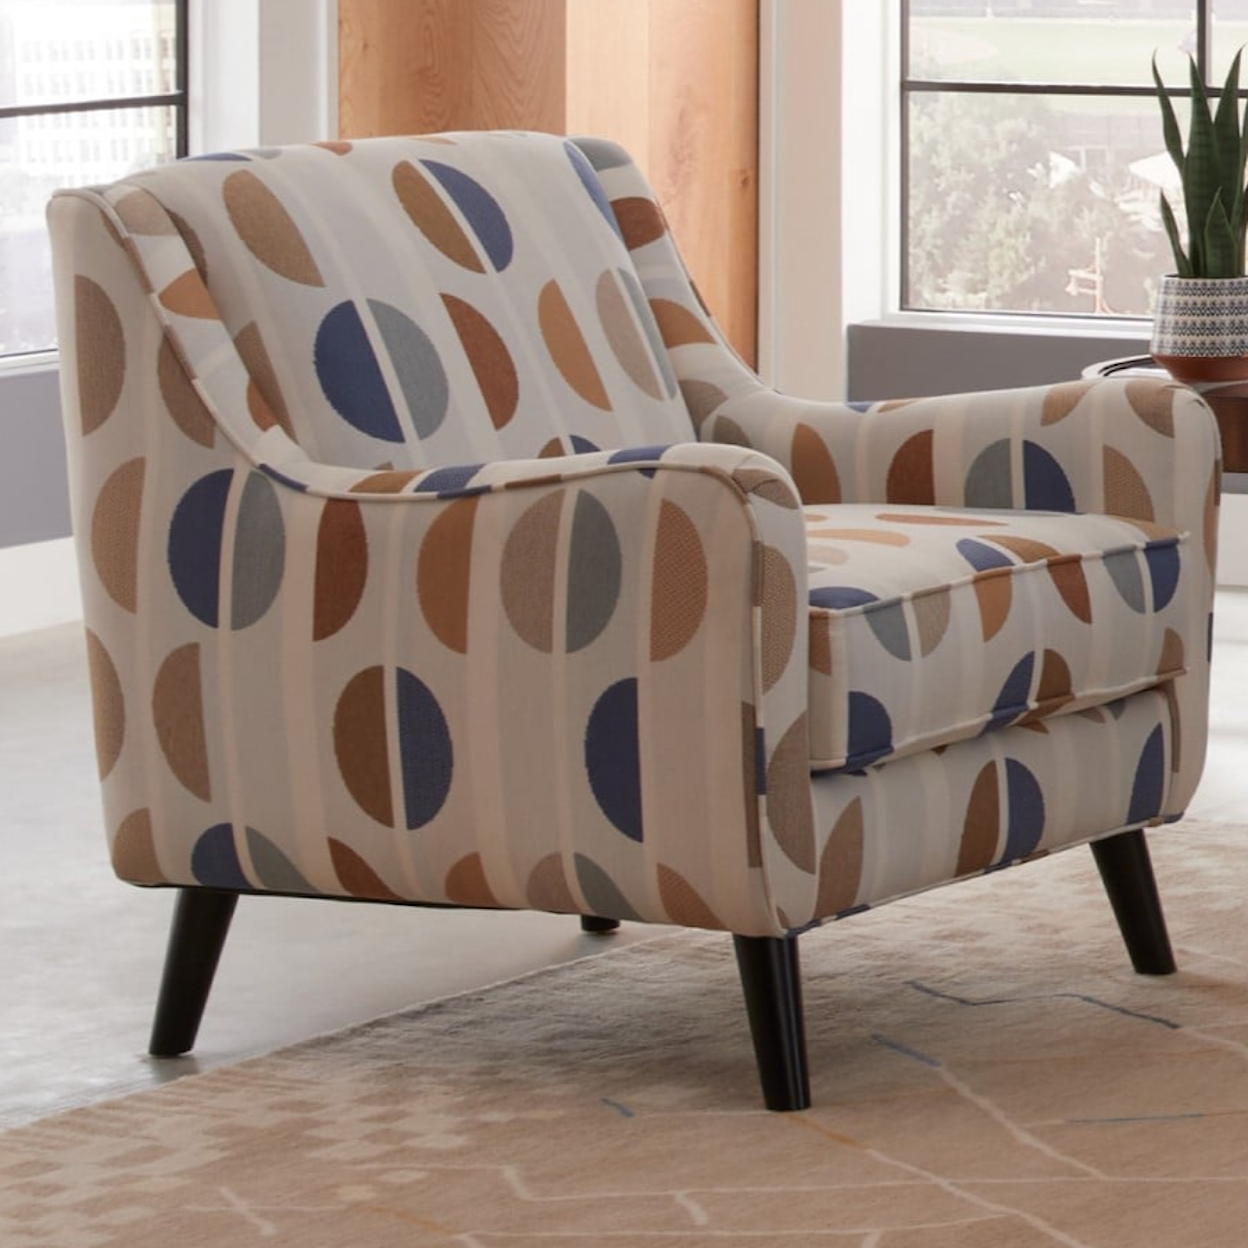 Fusion Furniture 5005 HERZL DENIM LOXLEY COCONUT Accent Chair